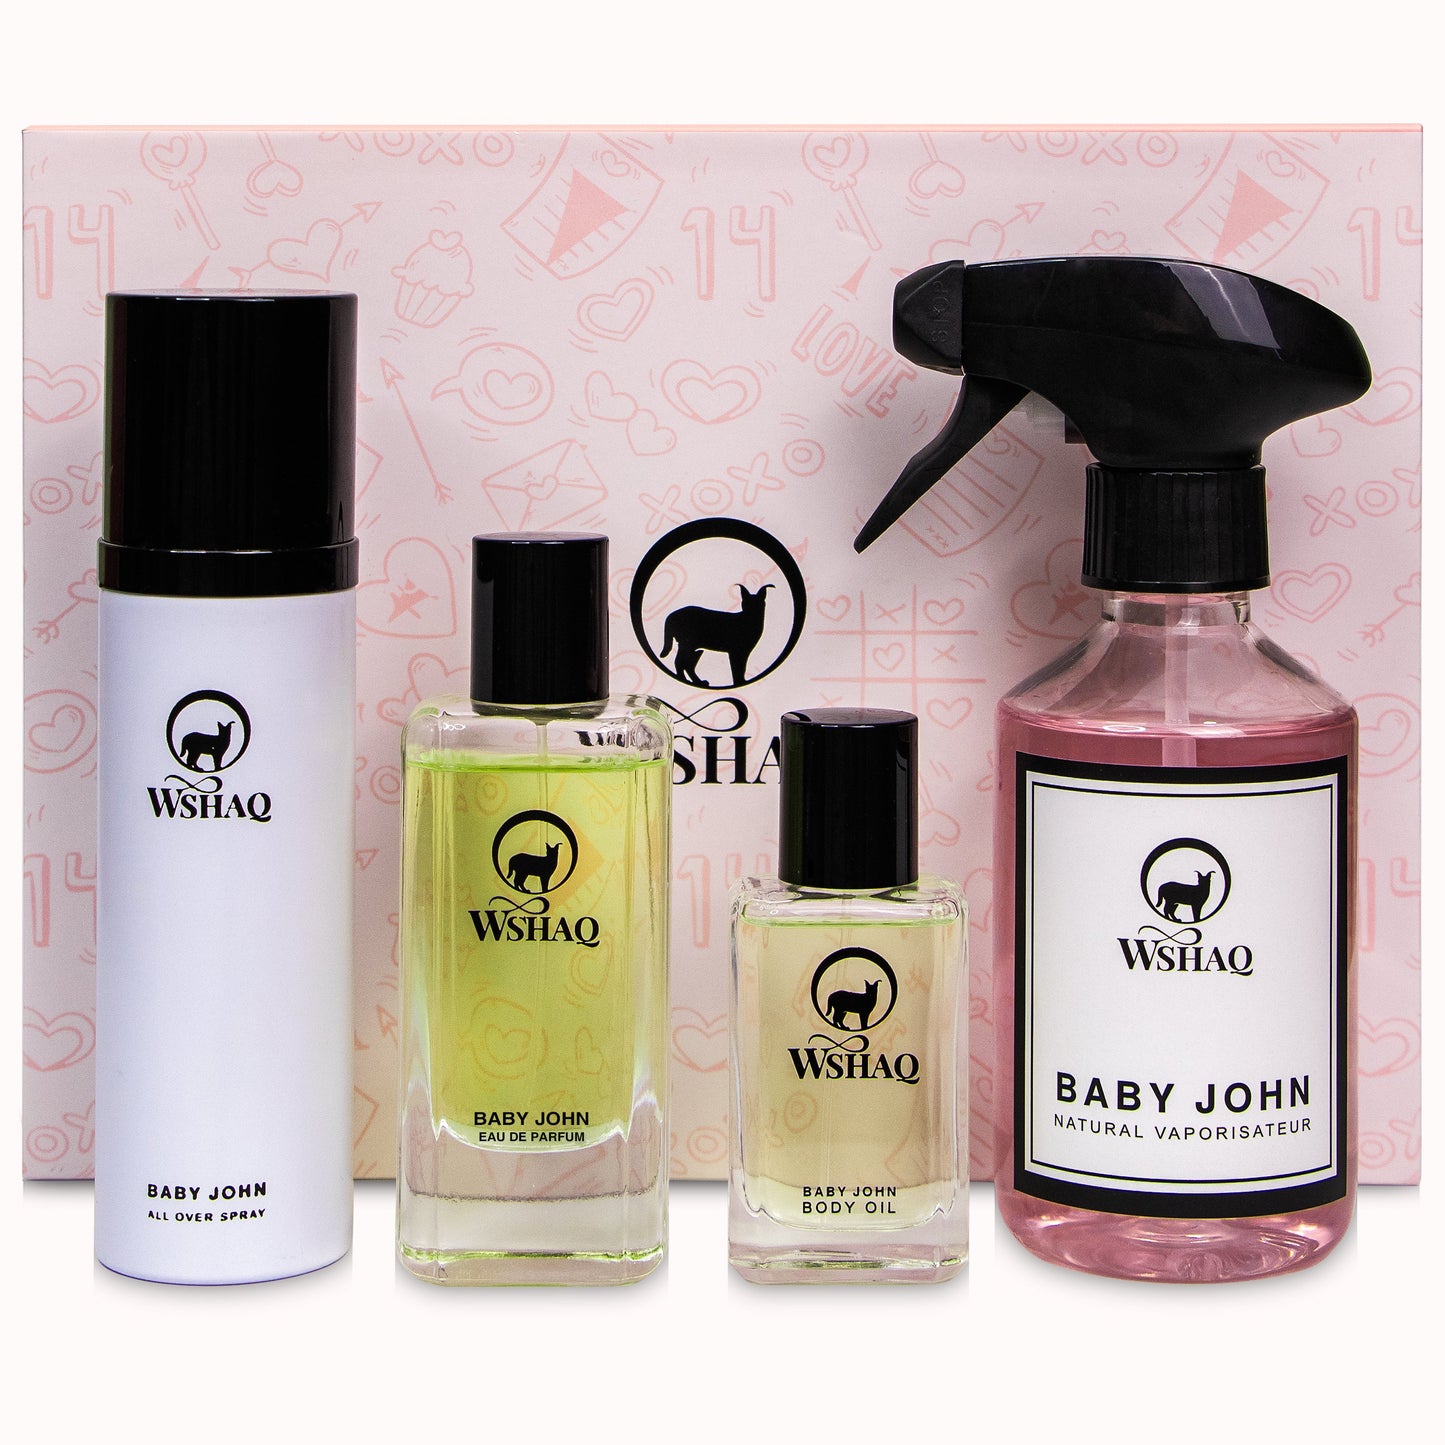 Baby jhon collection